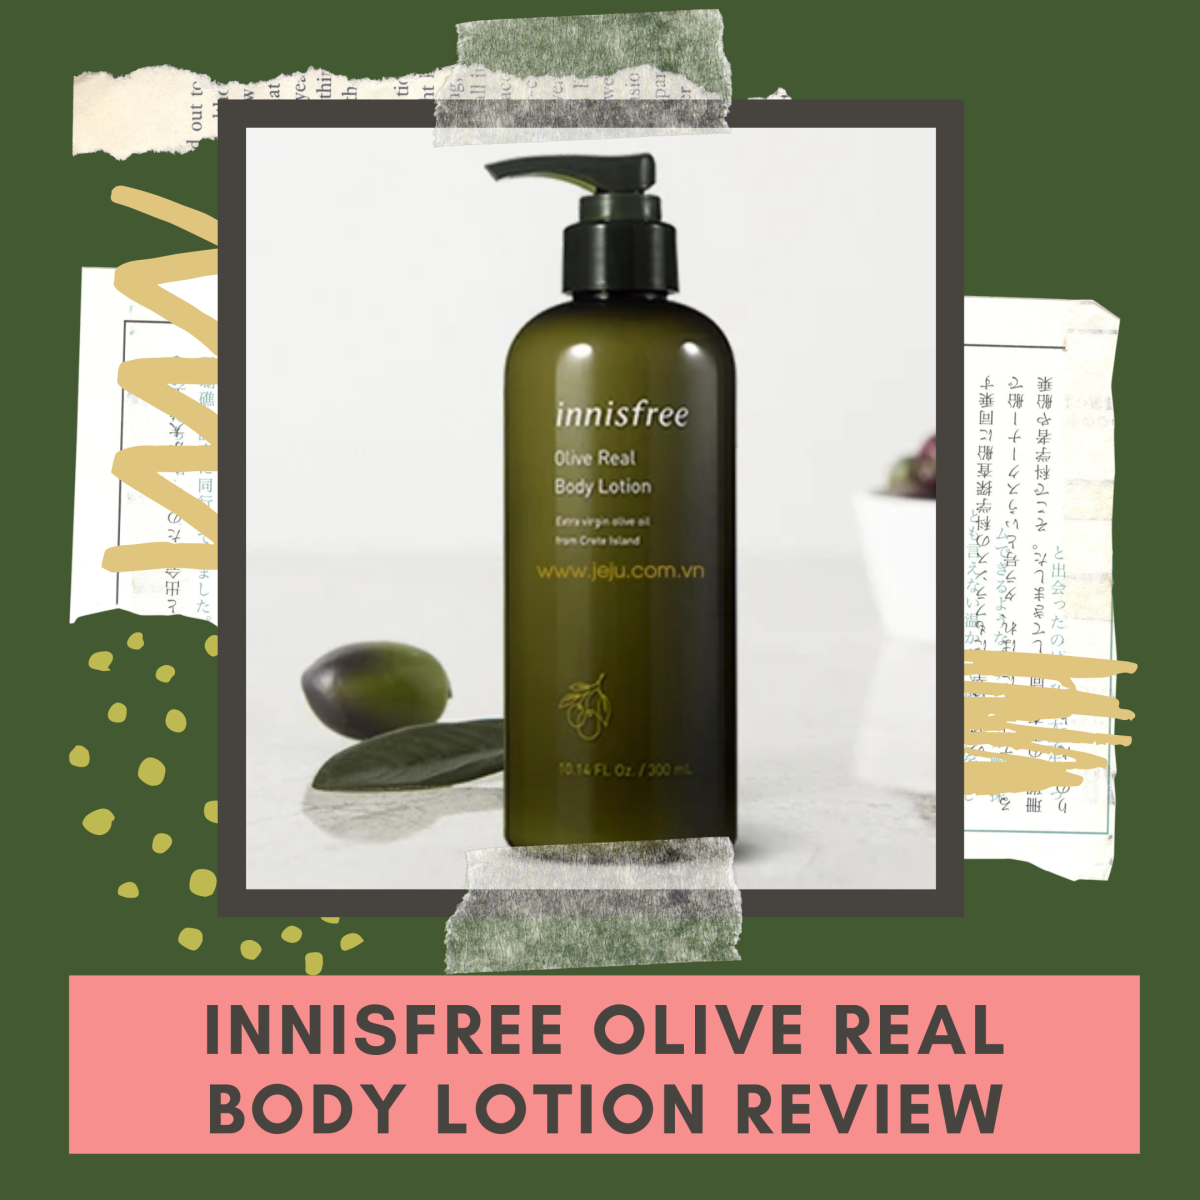 Innisfree Olive Real Body Lotion Review